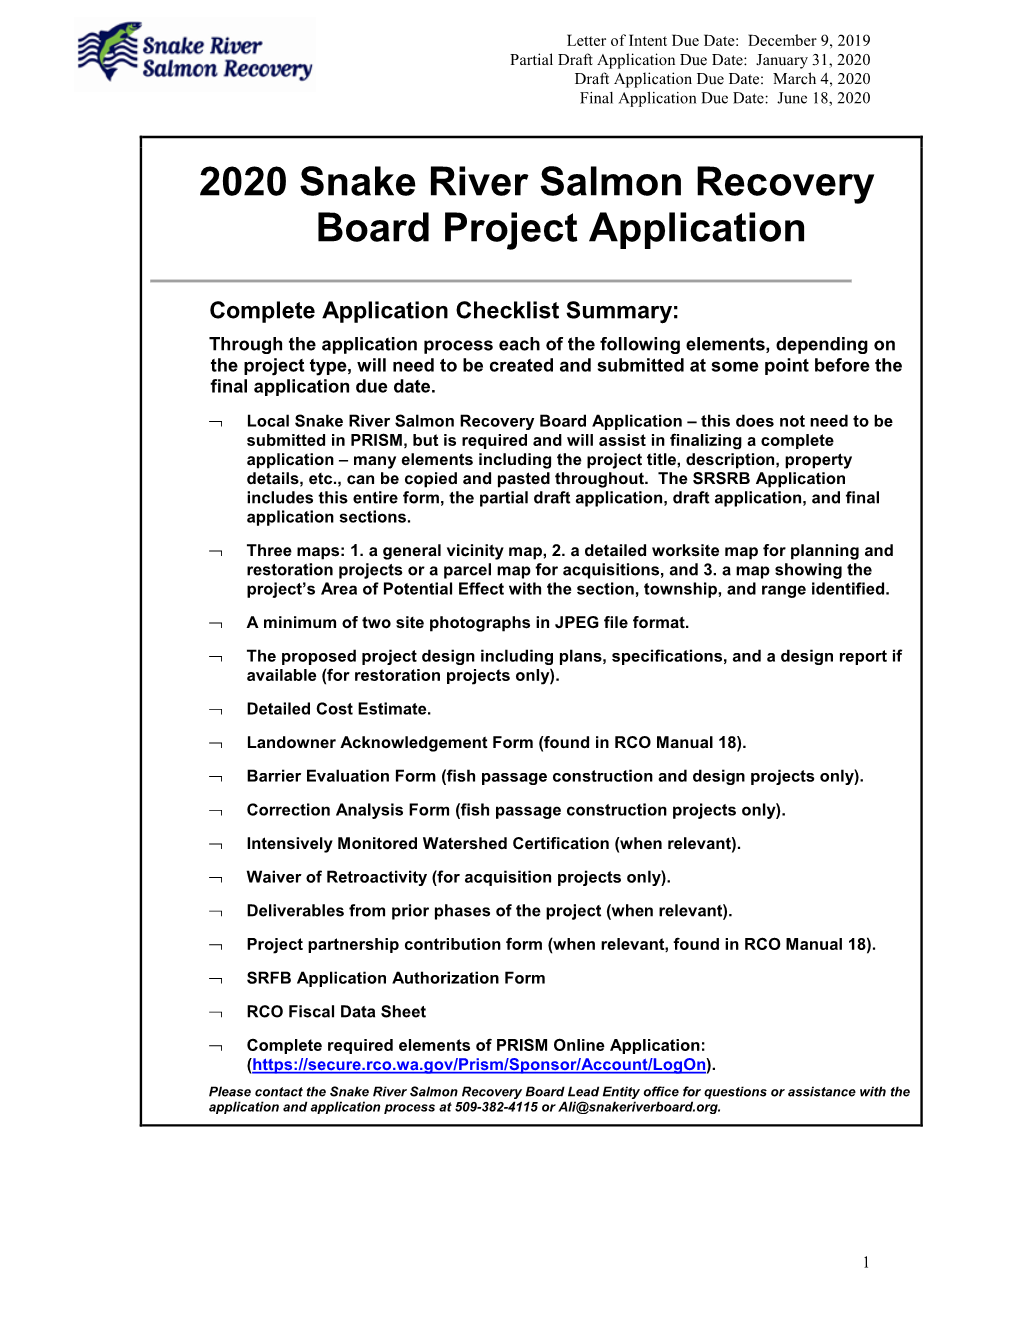 2020 Snake River Salmon Recovery Board Project Application